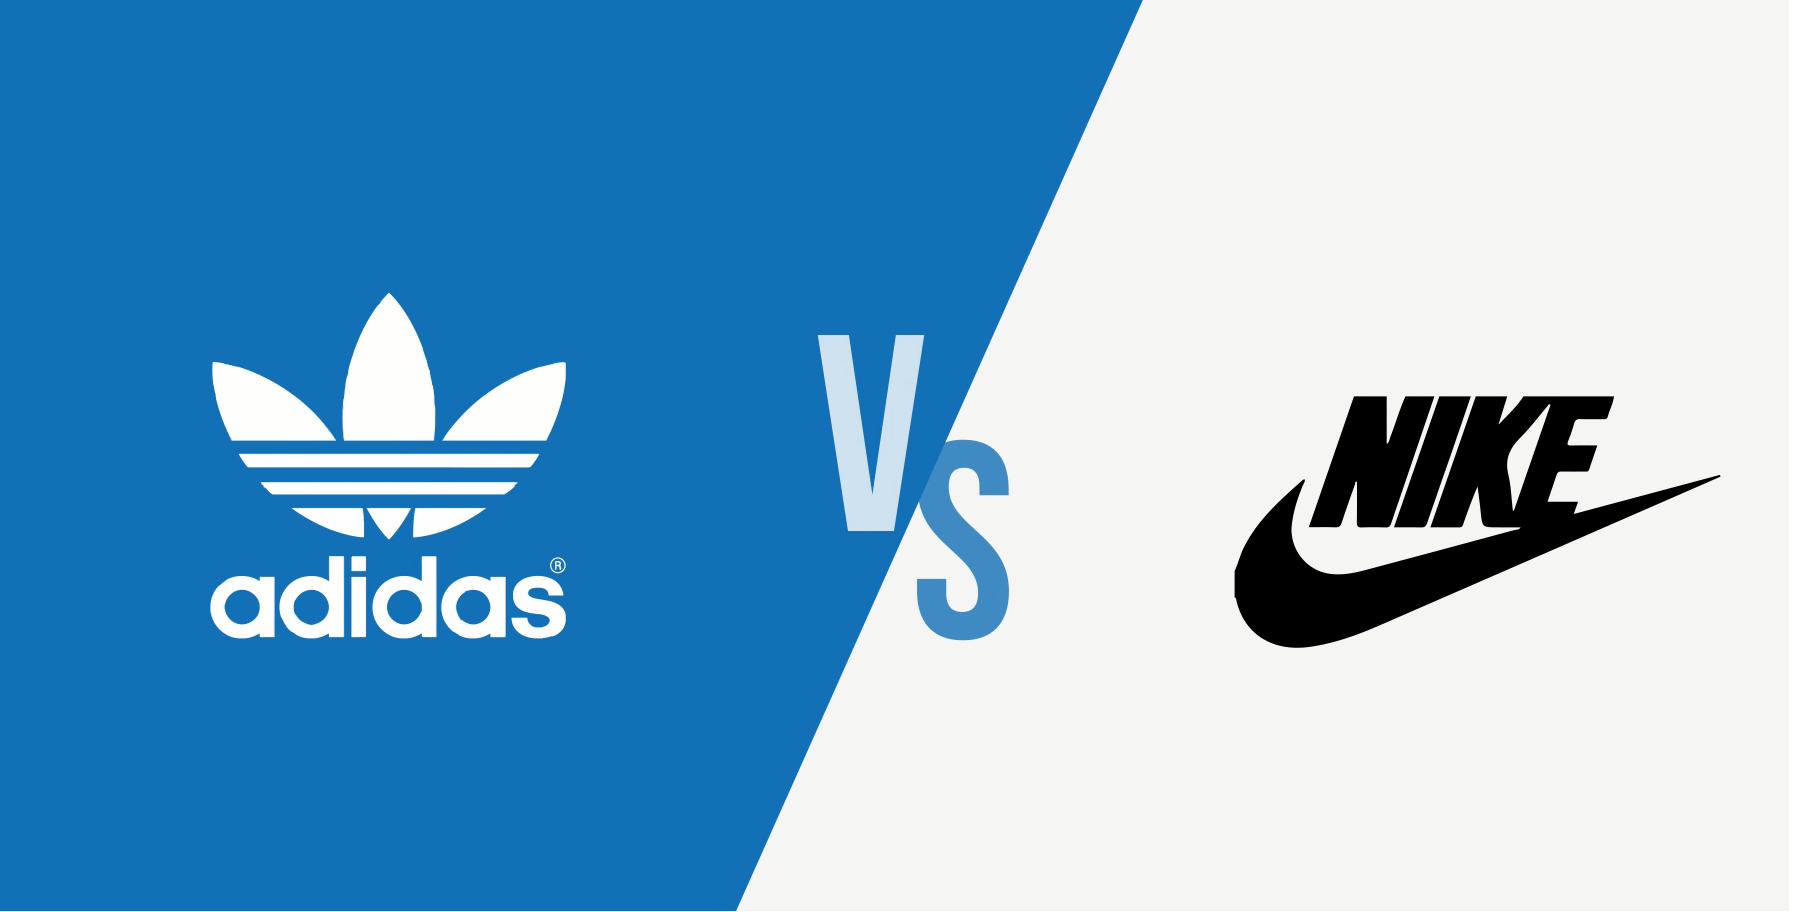 Adidas vs Nike: What Is The Difference In Sizing?